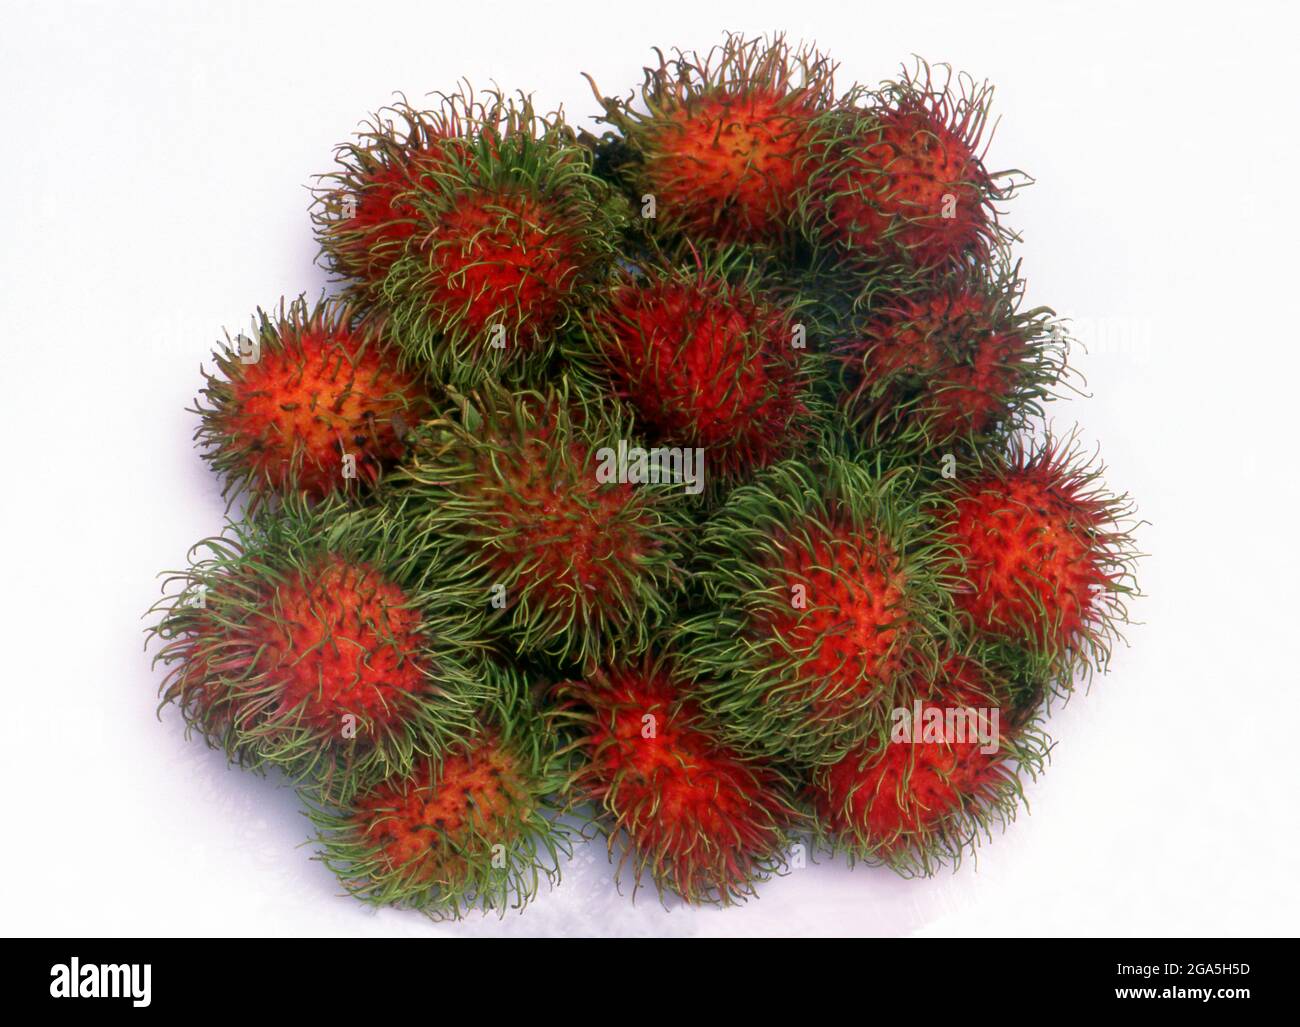 The rambutan (Nephelium lappaceum) is a medium-sized tropical tree in the family Sapindaceae. The fruit produced by the tree is also known as rambutan.  The name rambutan is derived from the Malay/Indonesian word rambutan, meaning 'hairy', rambut the word for 'hair' in both languages, a reference to the numerous hairy protuberances of the fruit, together with the noun-building suffix -an. Stock Photo